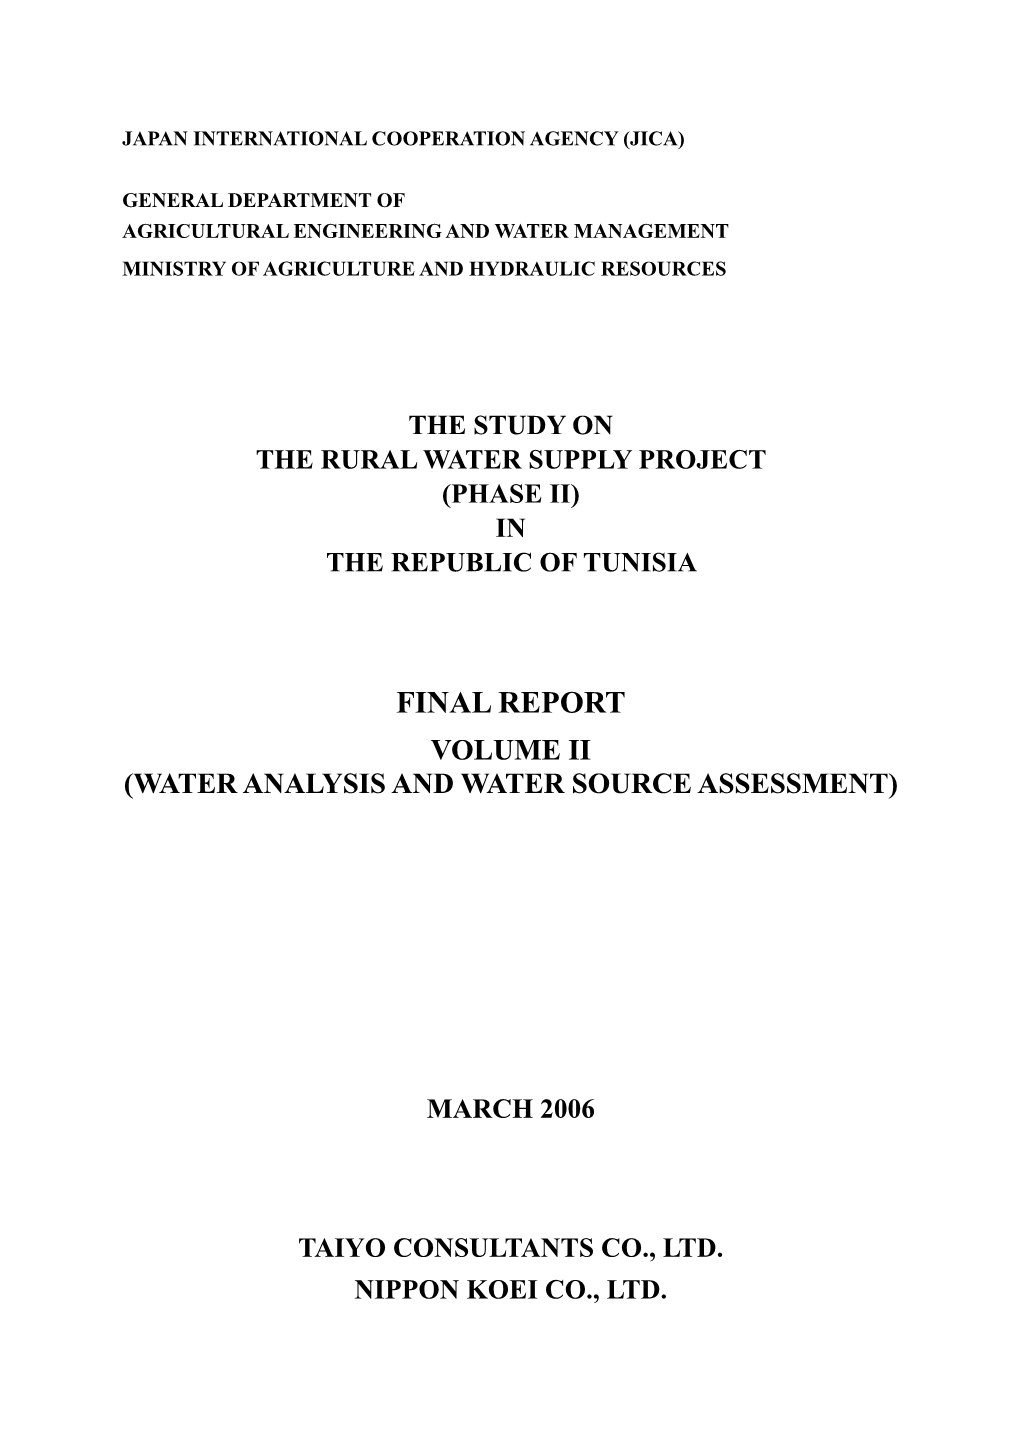 Final Report Volume Ii (Water Analysis and Water Source Assessment)